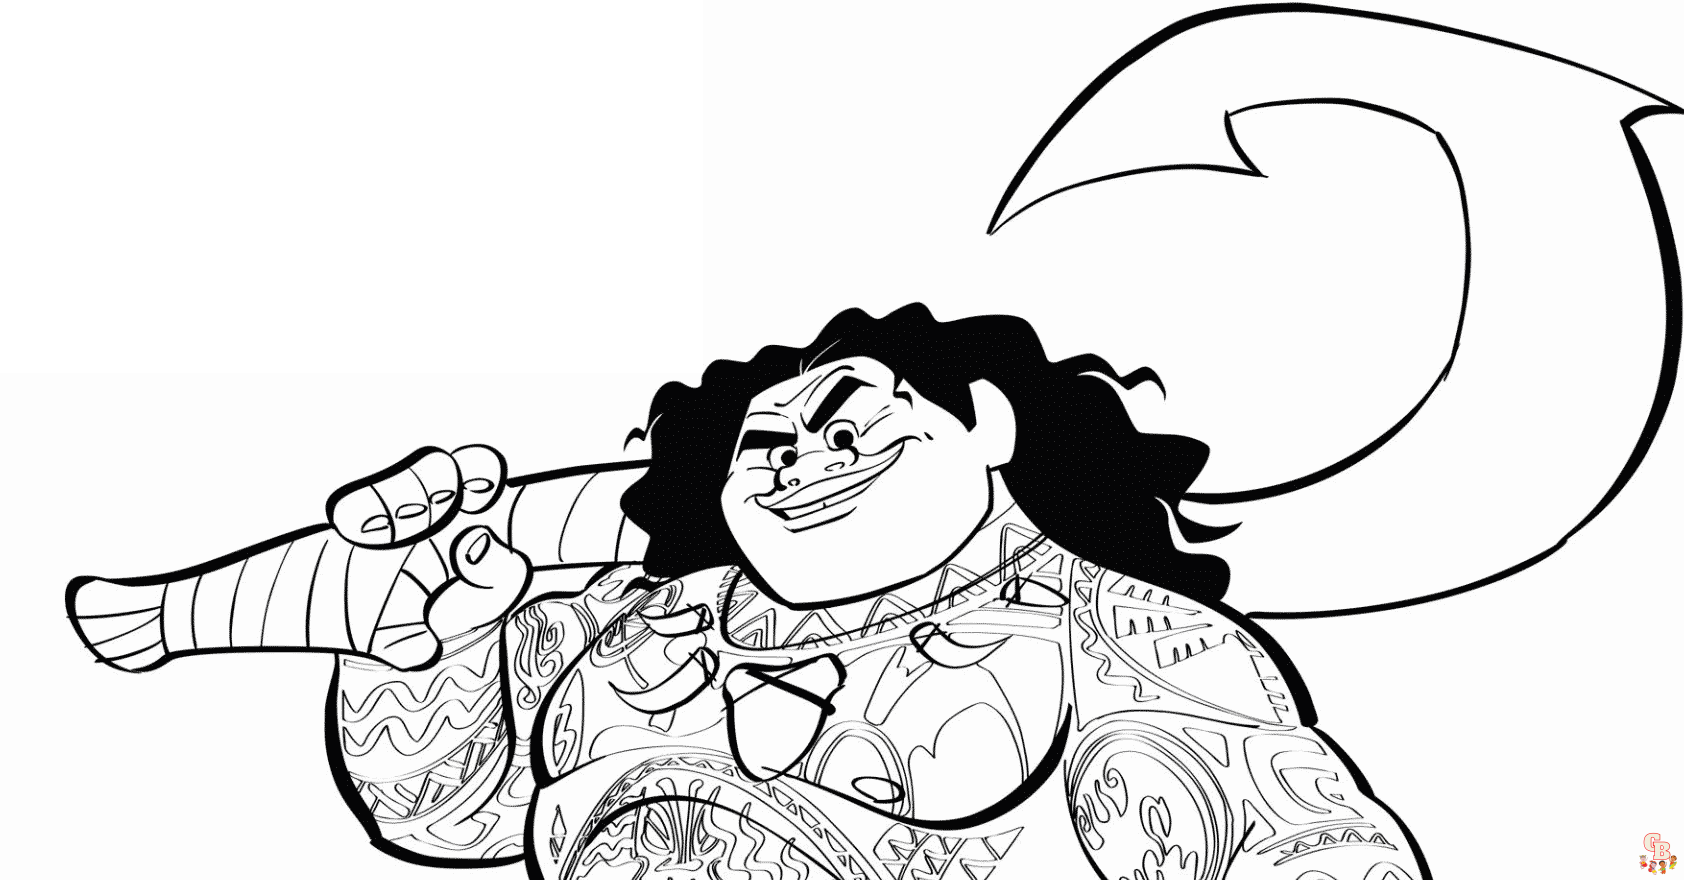 Maui From Moana coloring pages free